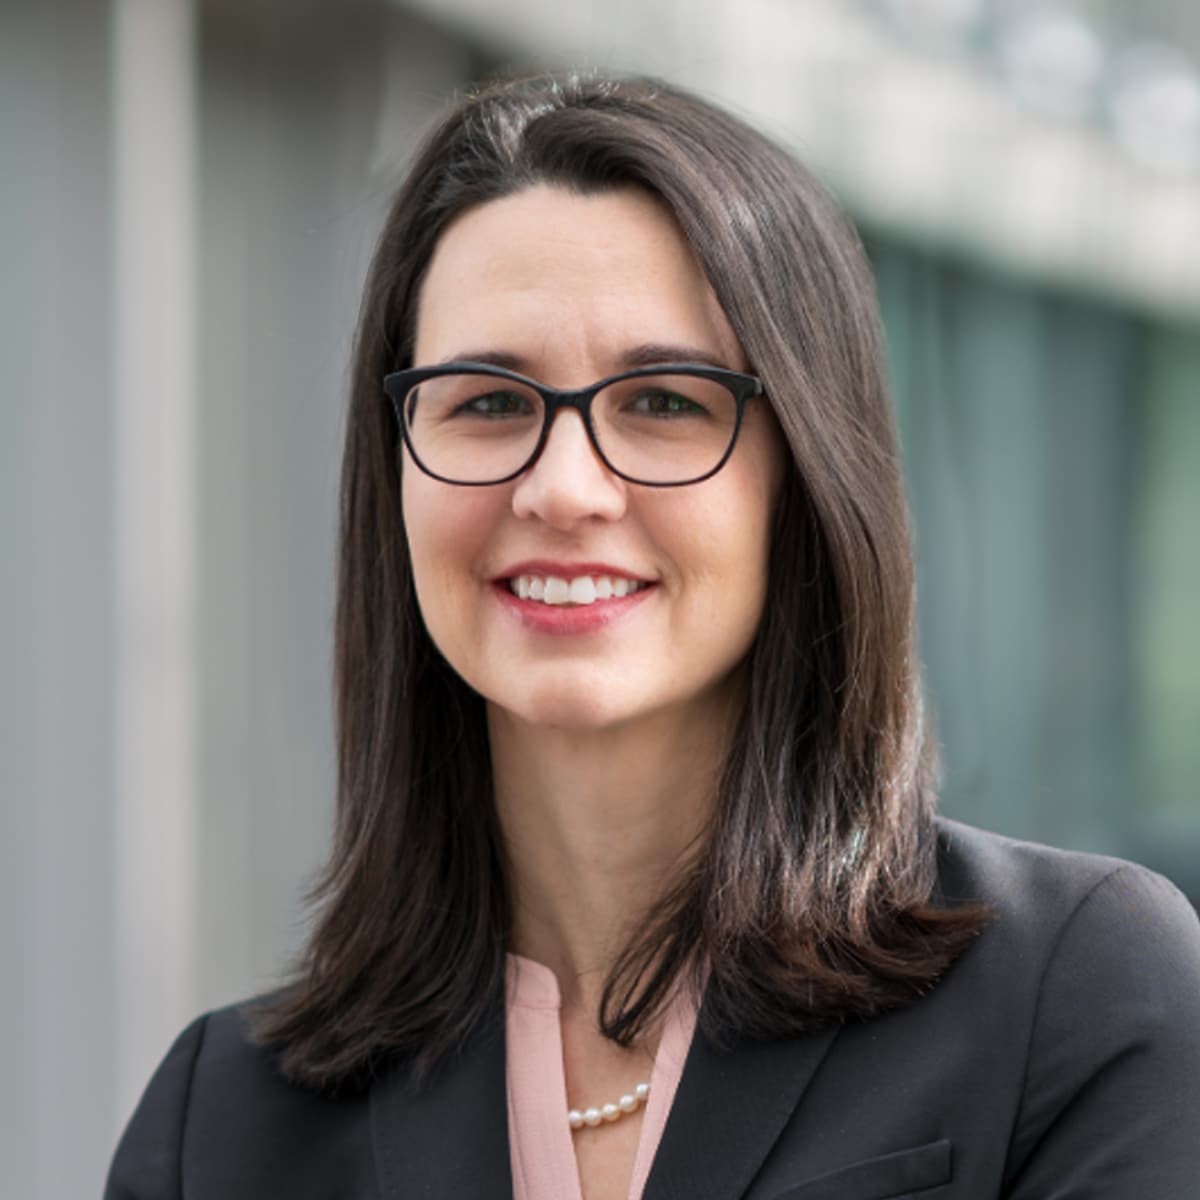 Adrienne Keen, Ph.D., is the director of the Inform division for the Center for Forecasting and Outbreak Analytics, has shoulder-length brown hair and is wearing glasses with a black suit jacket.